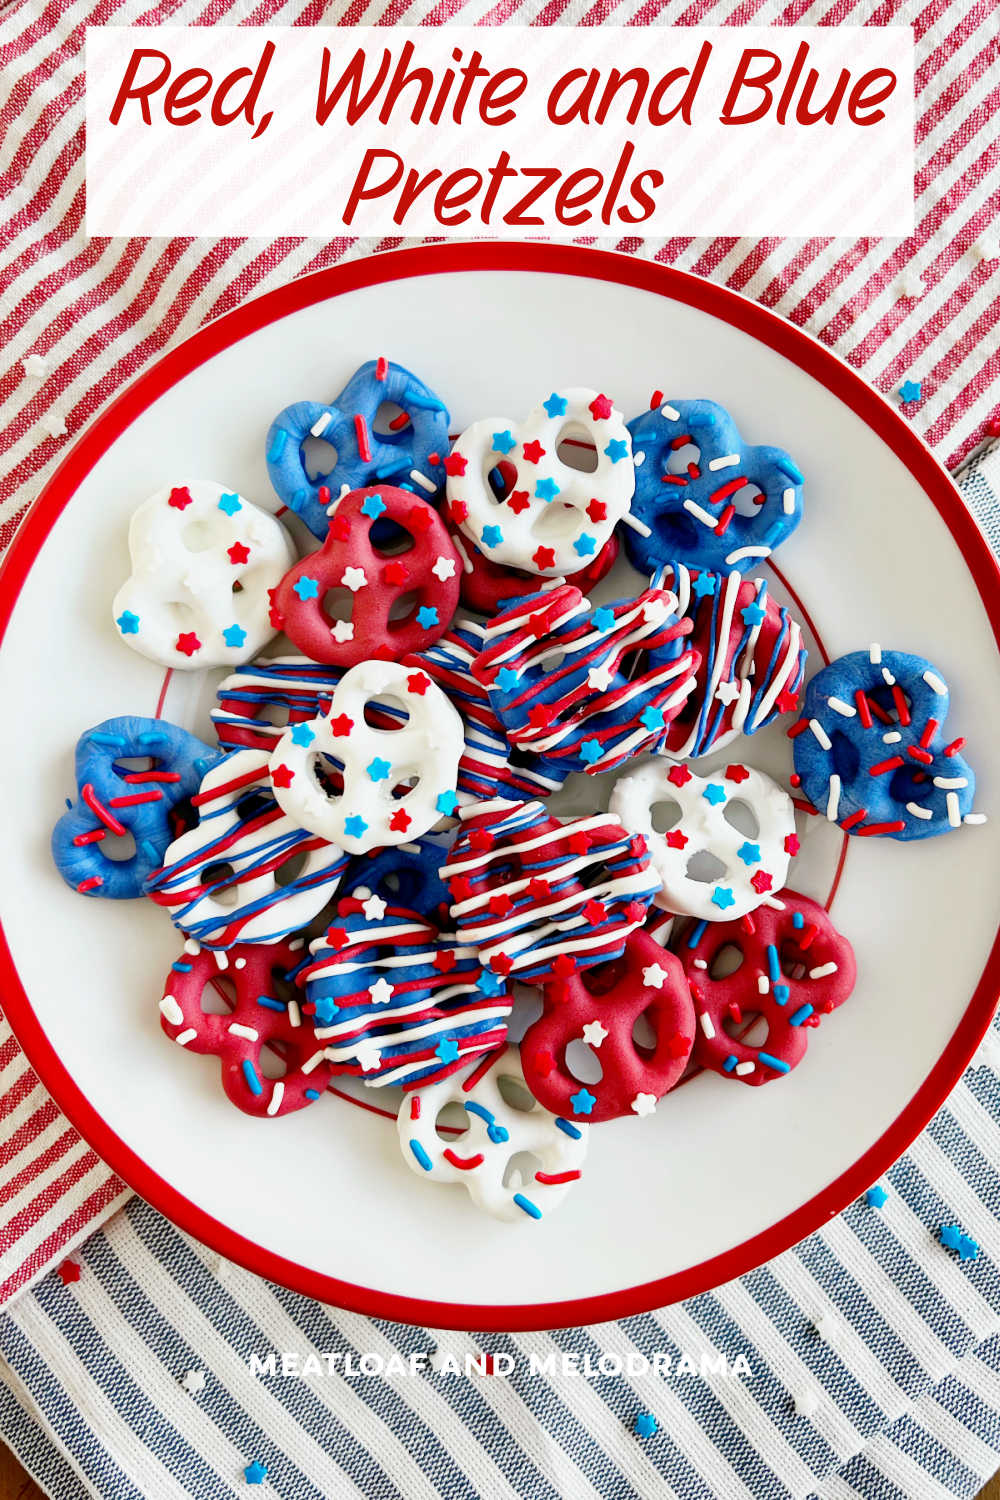 Red White and Blue Pretzels dipped in melted candy coating and topped with patriotic sprinkles are an easy sweet treat for the Fourth of July, Memorial Day and other patriotic holidays.  via @meamel